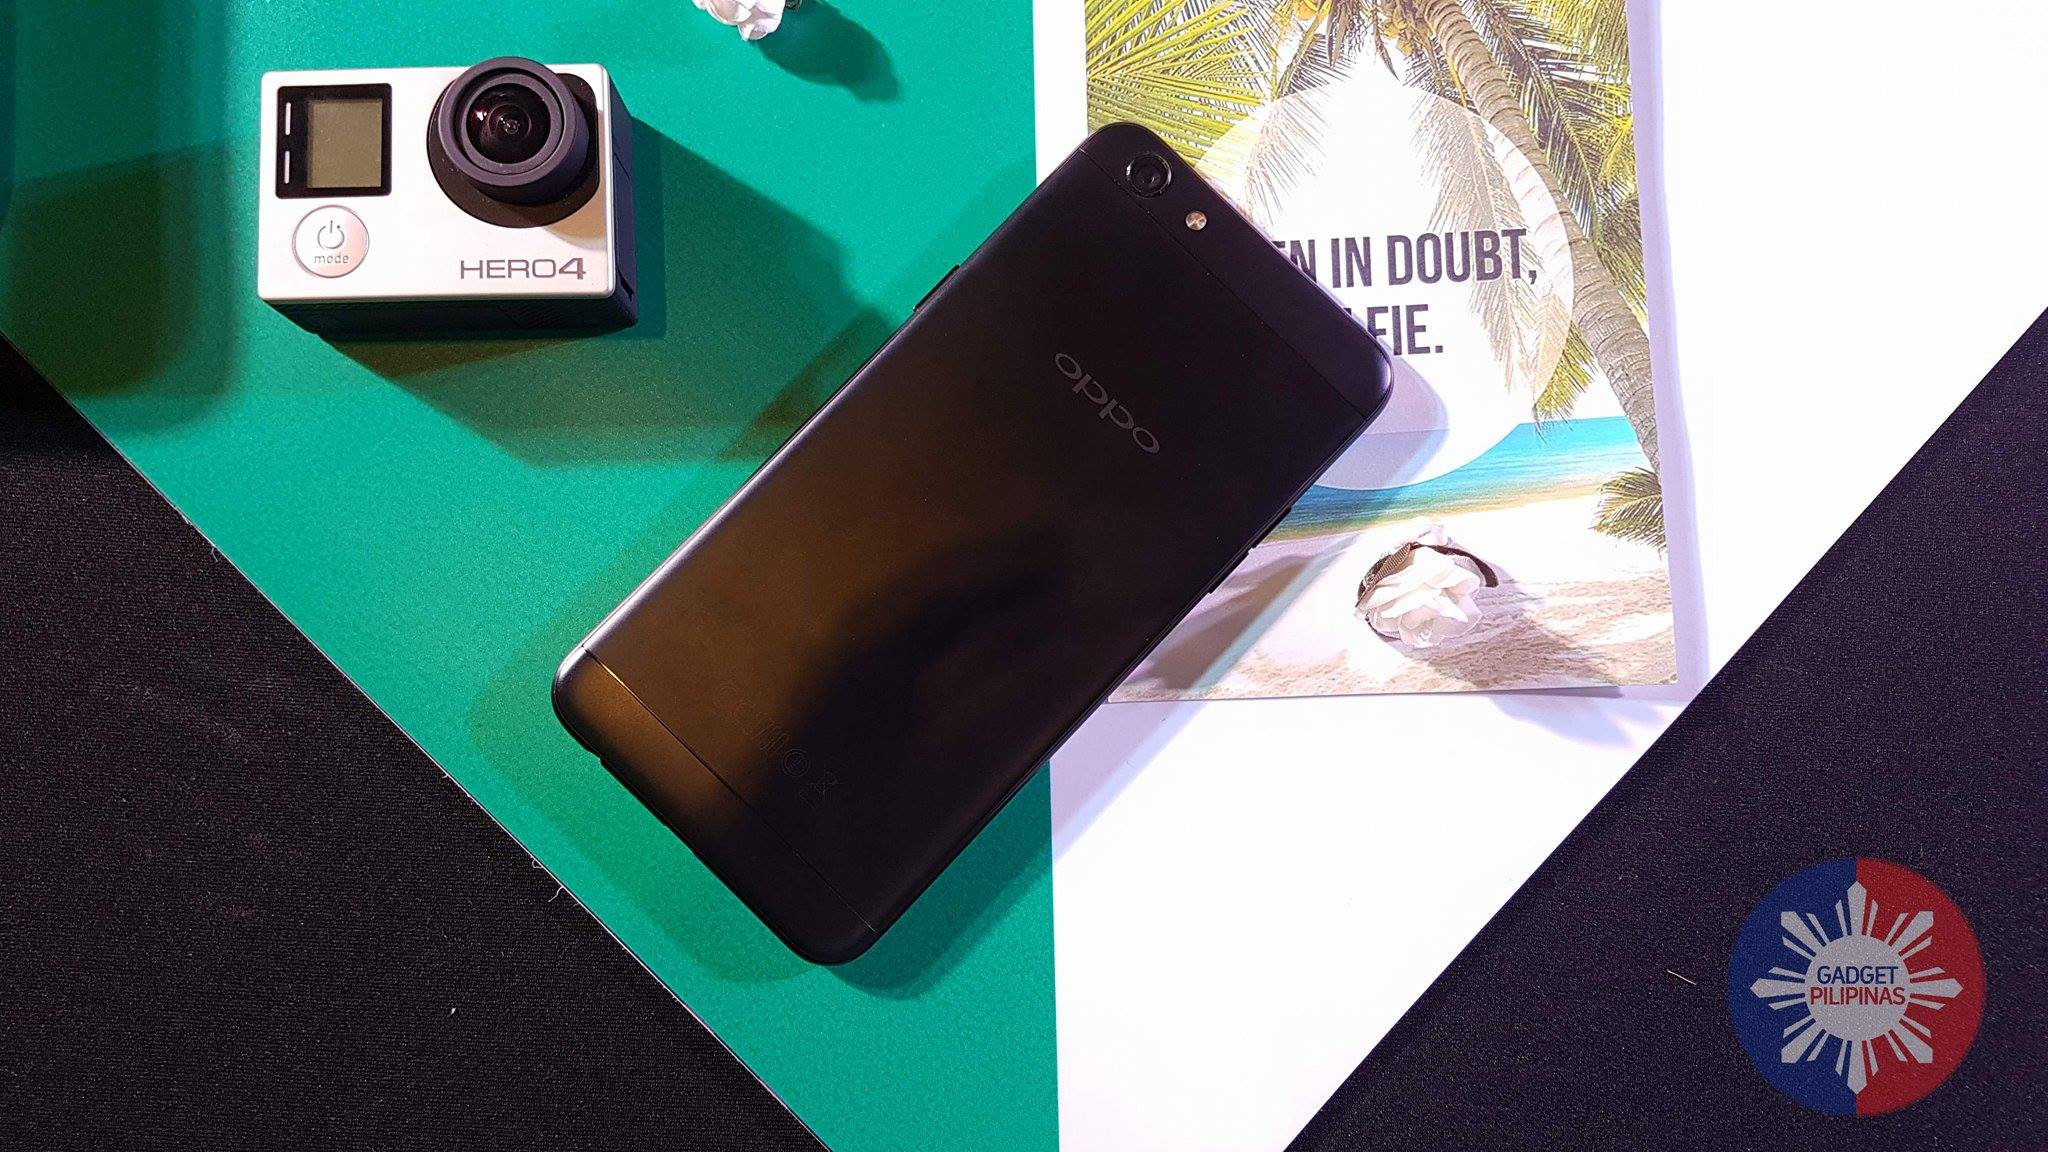 OPPO Launches Black Edition F3 in PH